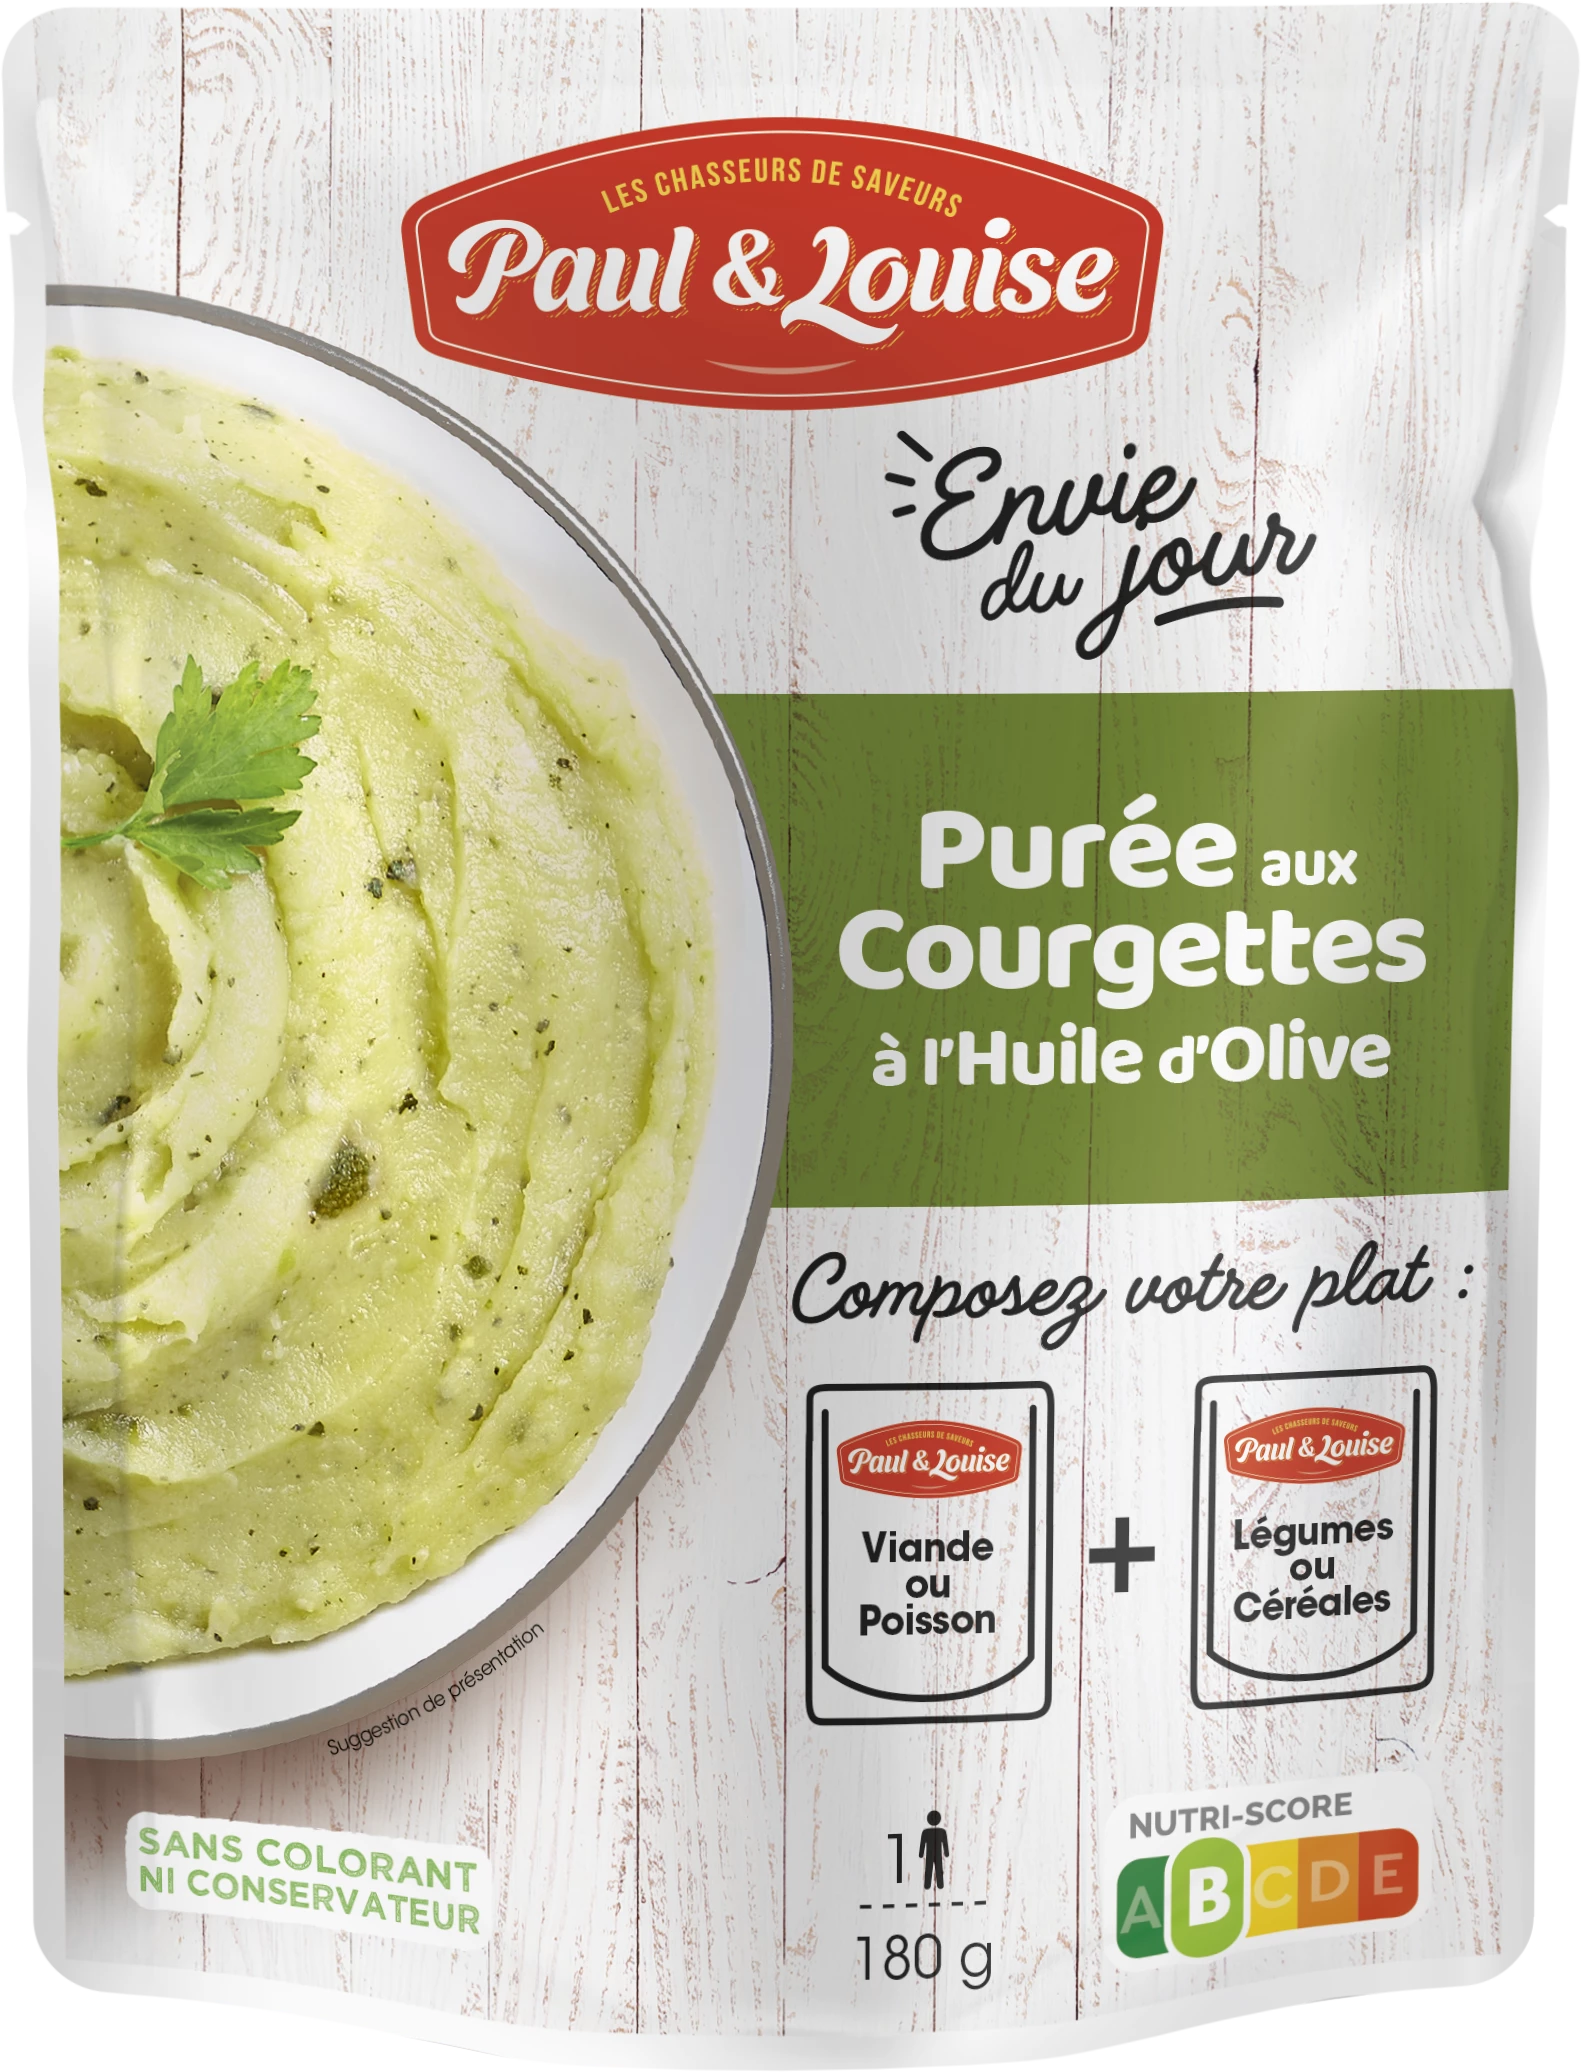 Zucchini Puree with Olive Oil, 180g - PAUL & LOUISE